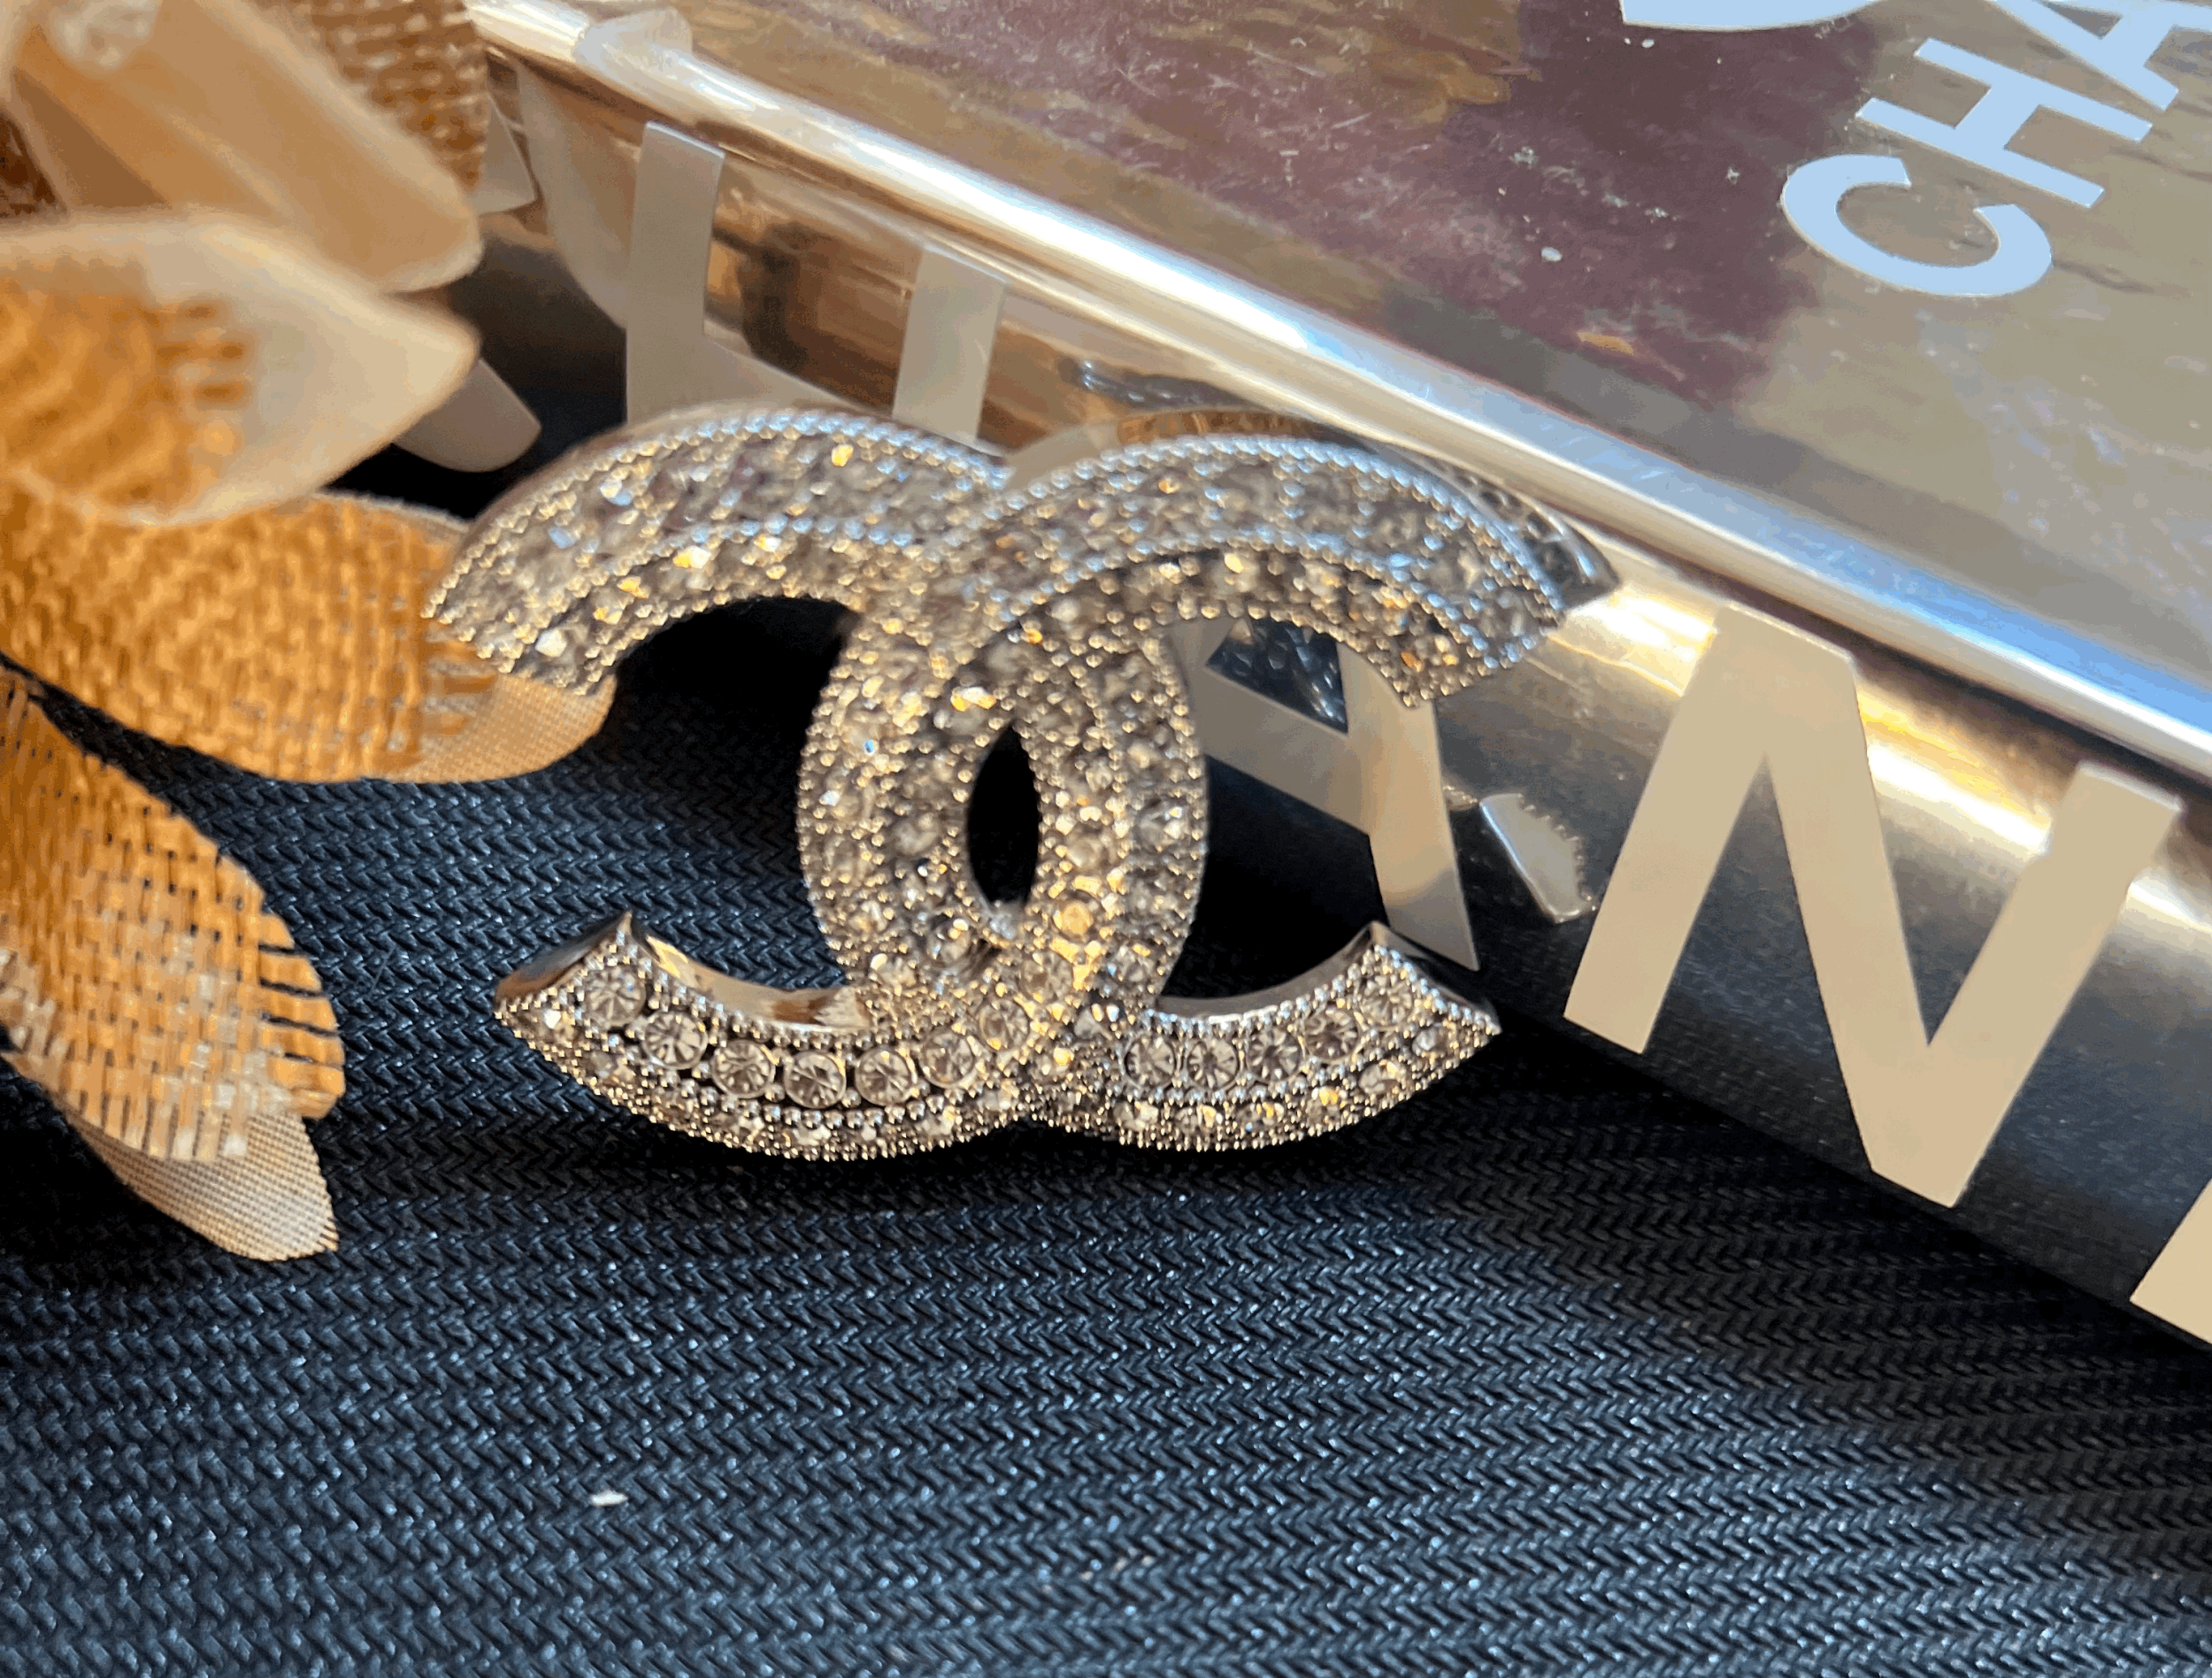 NEW in BOX 22K Chanel Brooch Pin Pearls Baguette Crystals Jewel Champ Gold  CC . 